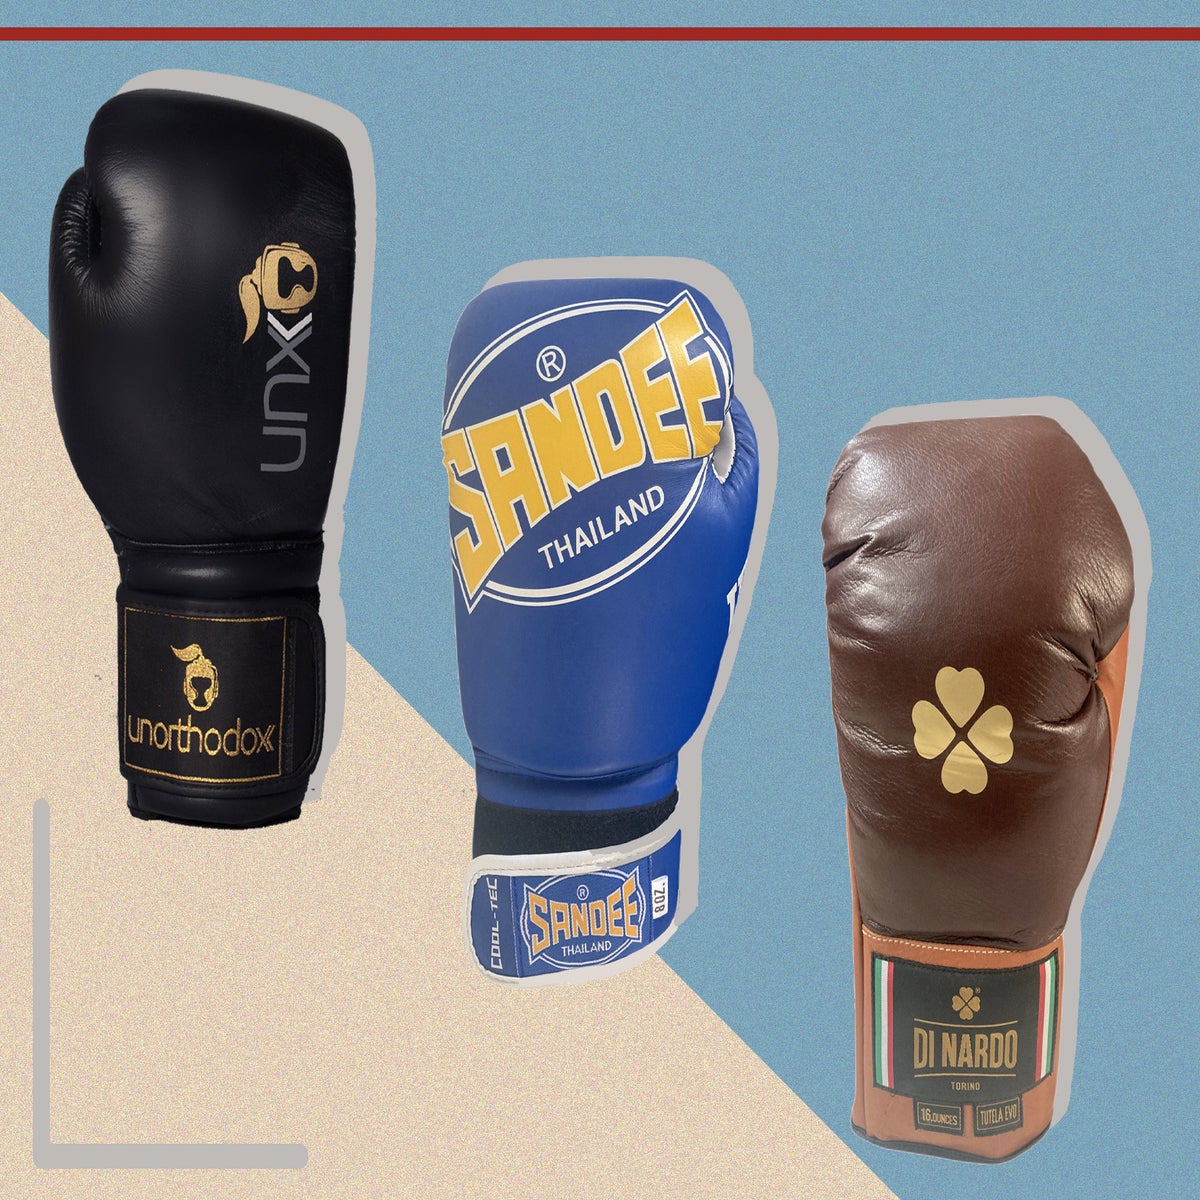 World Boxing Council on X: What's your favorite Boxing Gloves Brand?   / X